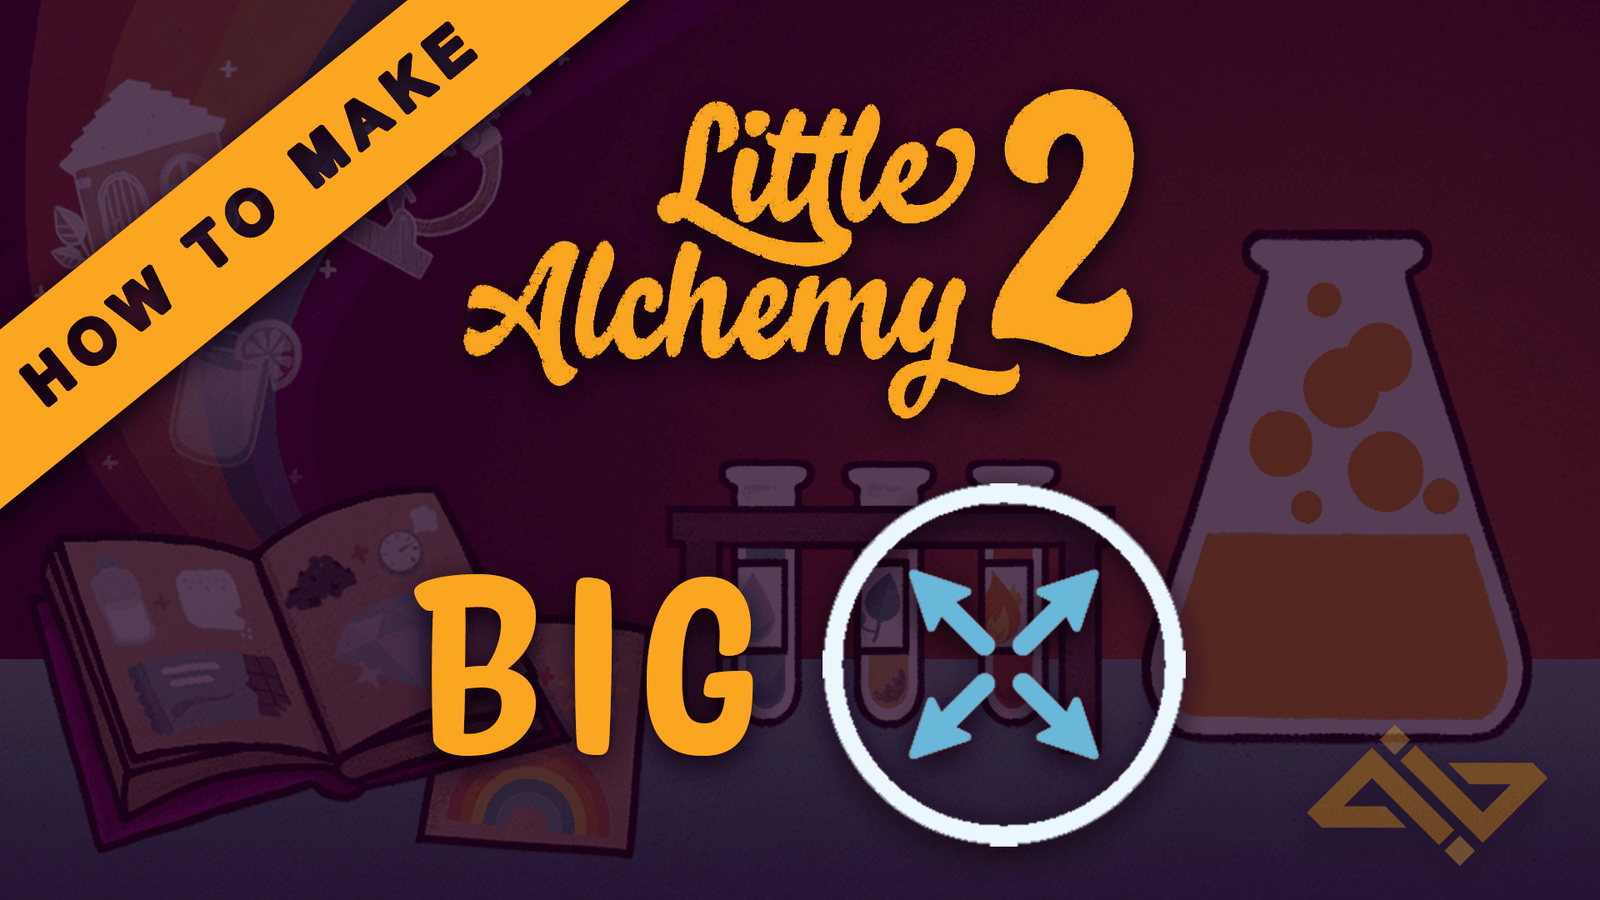 How To Make Big In Little Alchemy 2 - WhatIfGaming